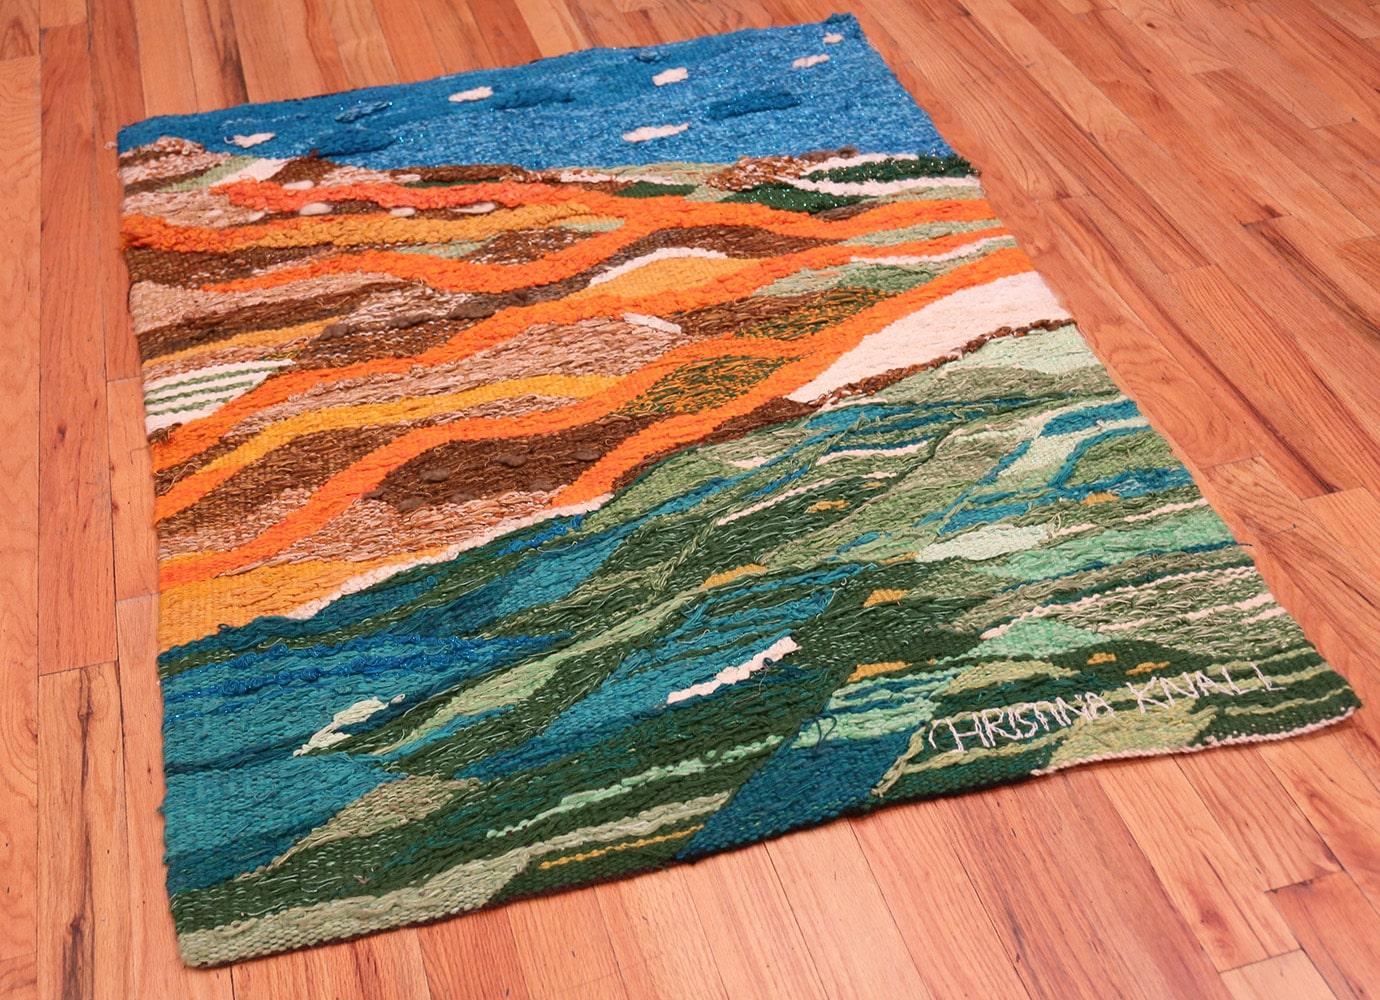 20th Century Scandinavian Landscape Tapestry. 3 ft 10 in x 5 ft For Sale